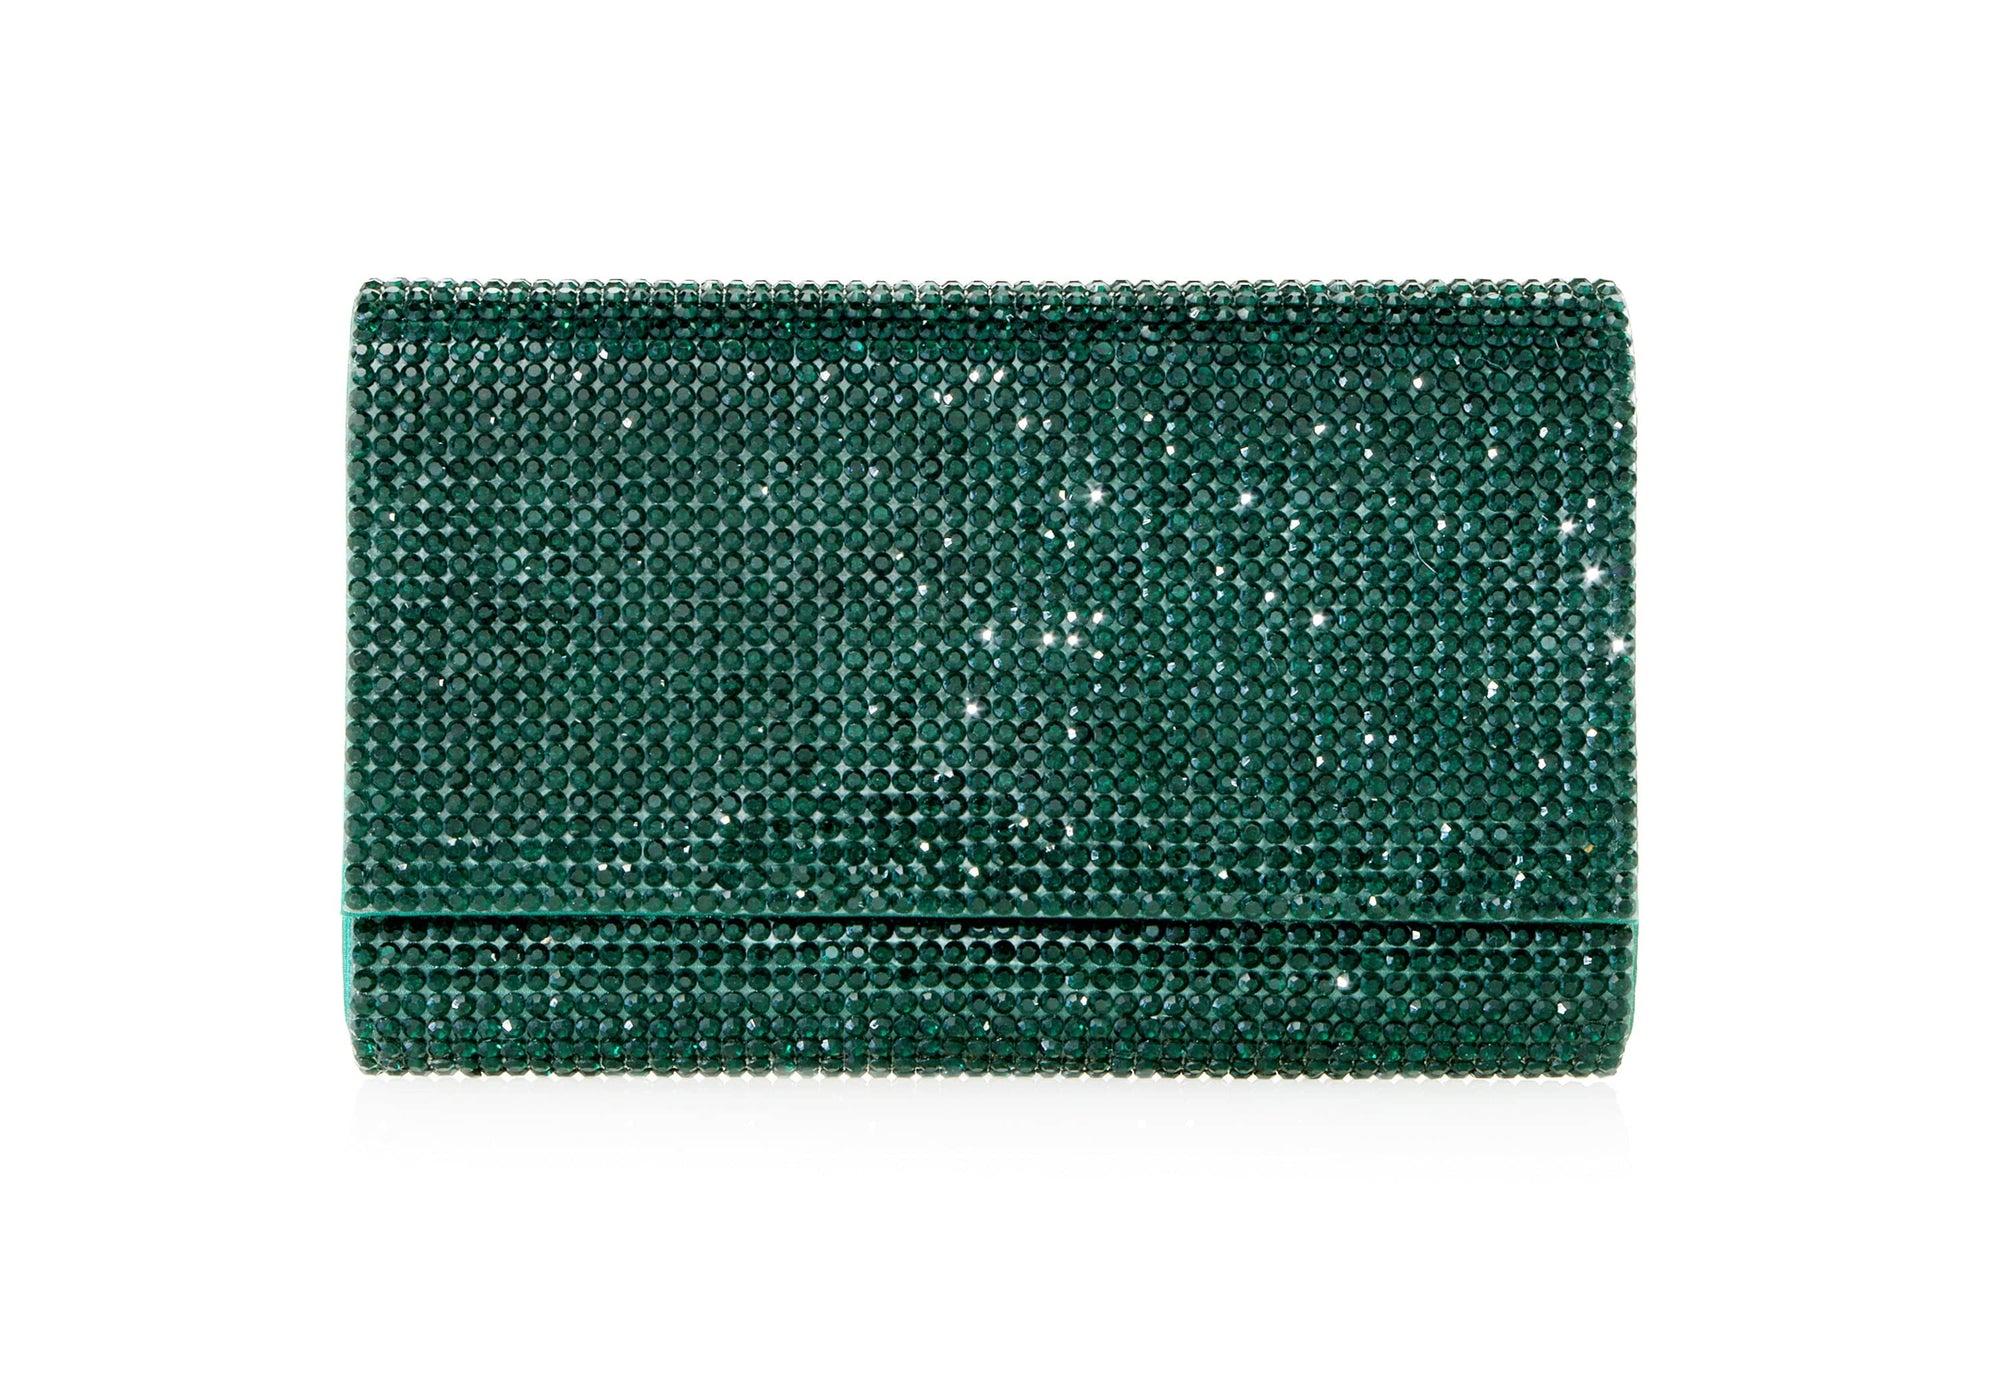 Fizzoni Crystal Clutch Couture Leiber Judith